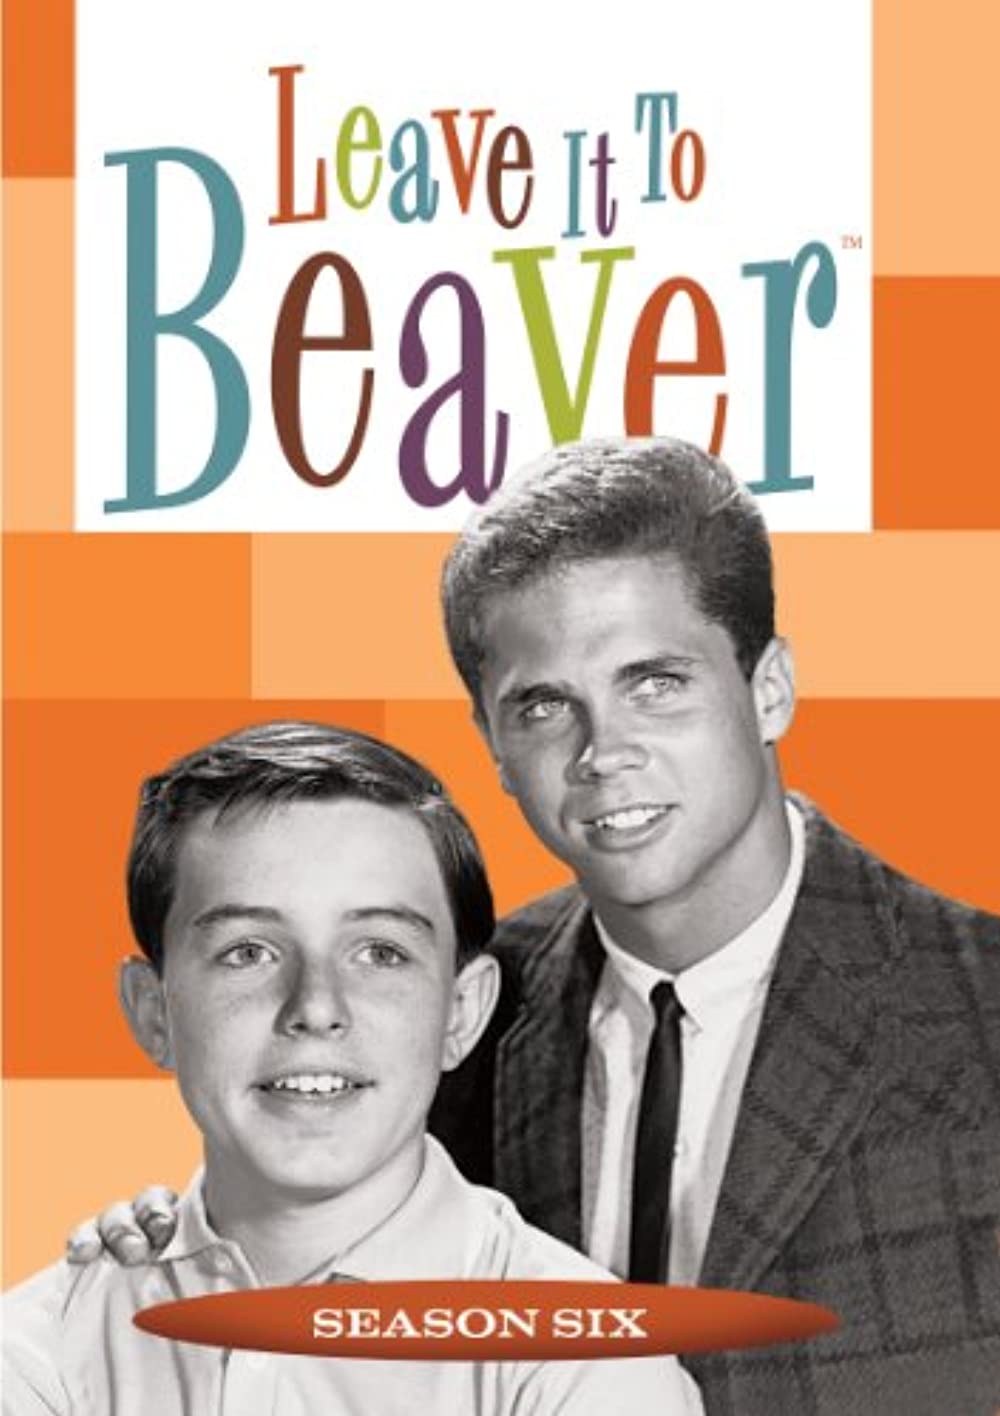 Leave It to Beaver: Season Six (DVD), Shout Factory, Comedy - image 2 of 2